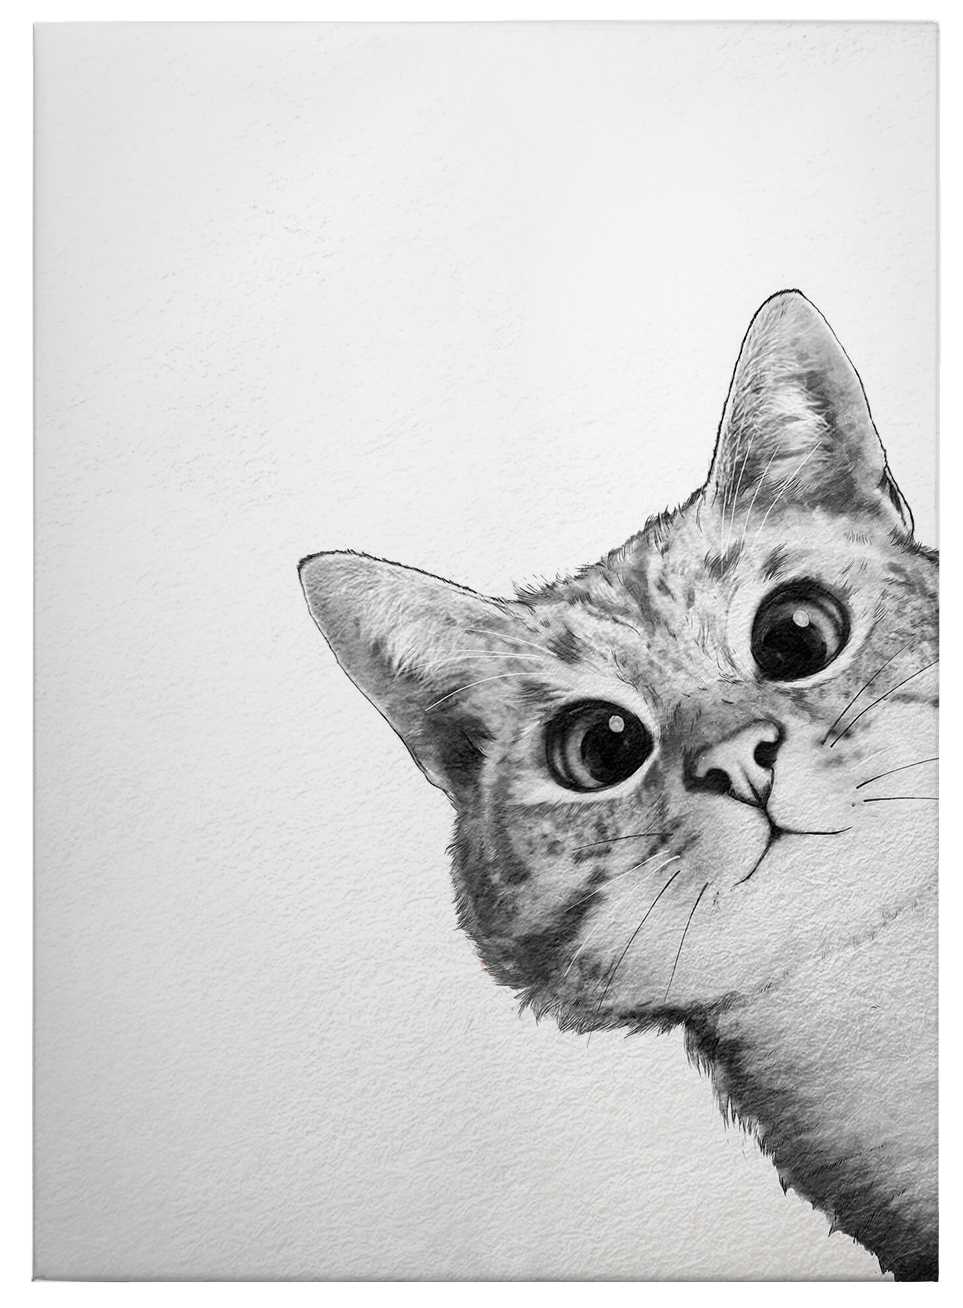             Canvas print "Sneaky Cat" by Graves, cat in black and white
        